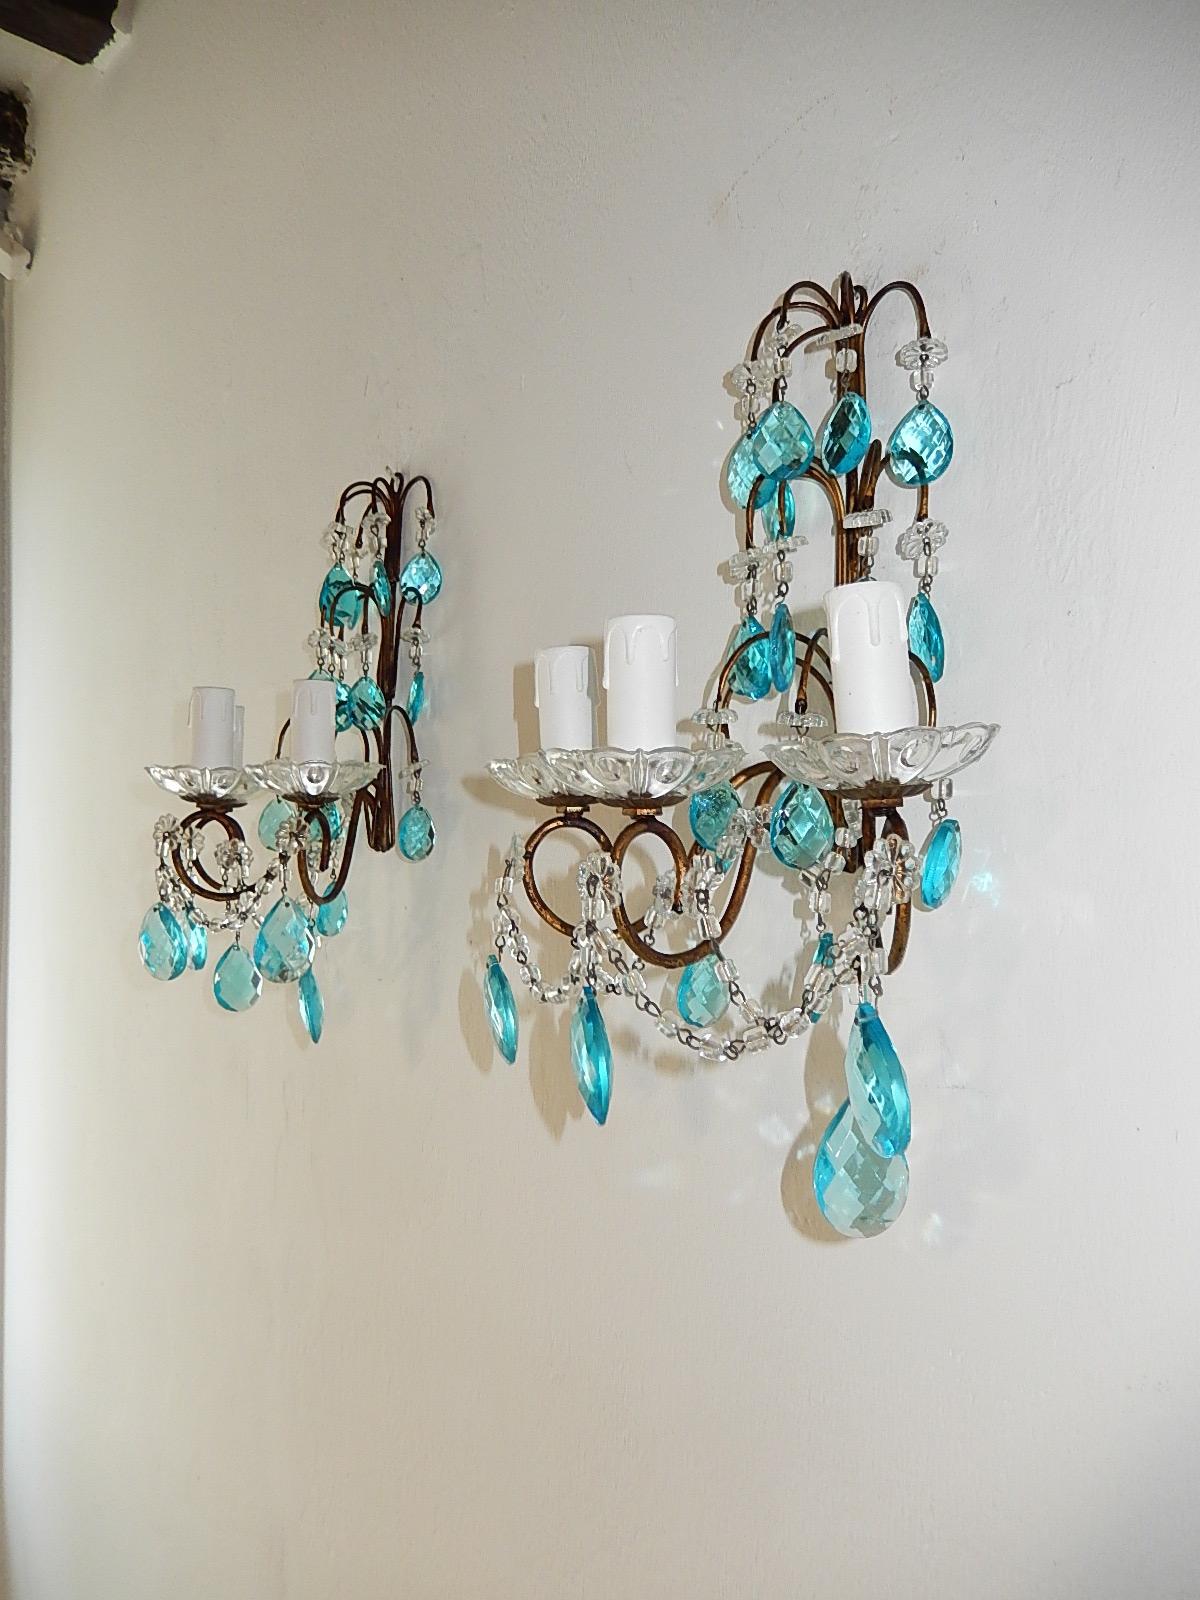 1920 French Aqua Blue Crystal Prisms and Swags Sconces In Good Condition For Sale In Modena (MO), Modena (Mo)